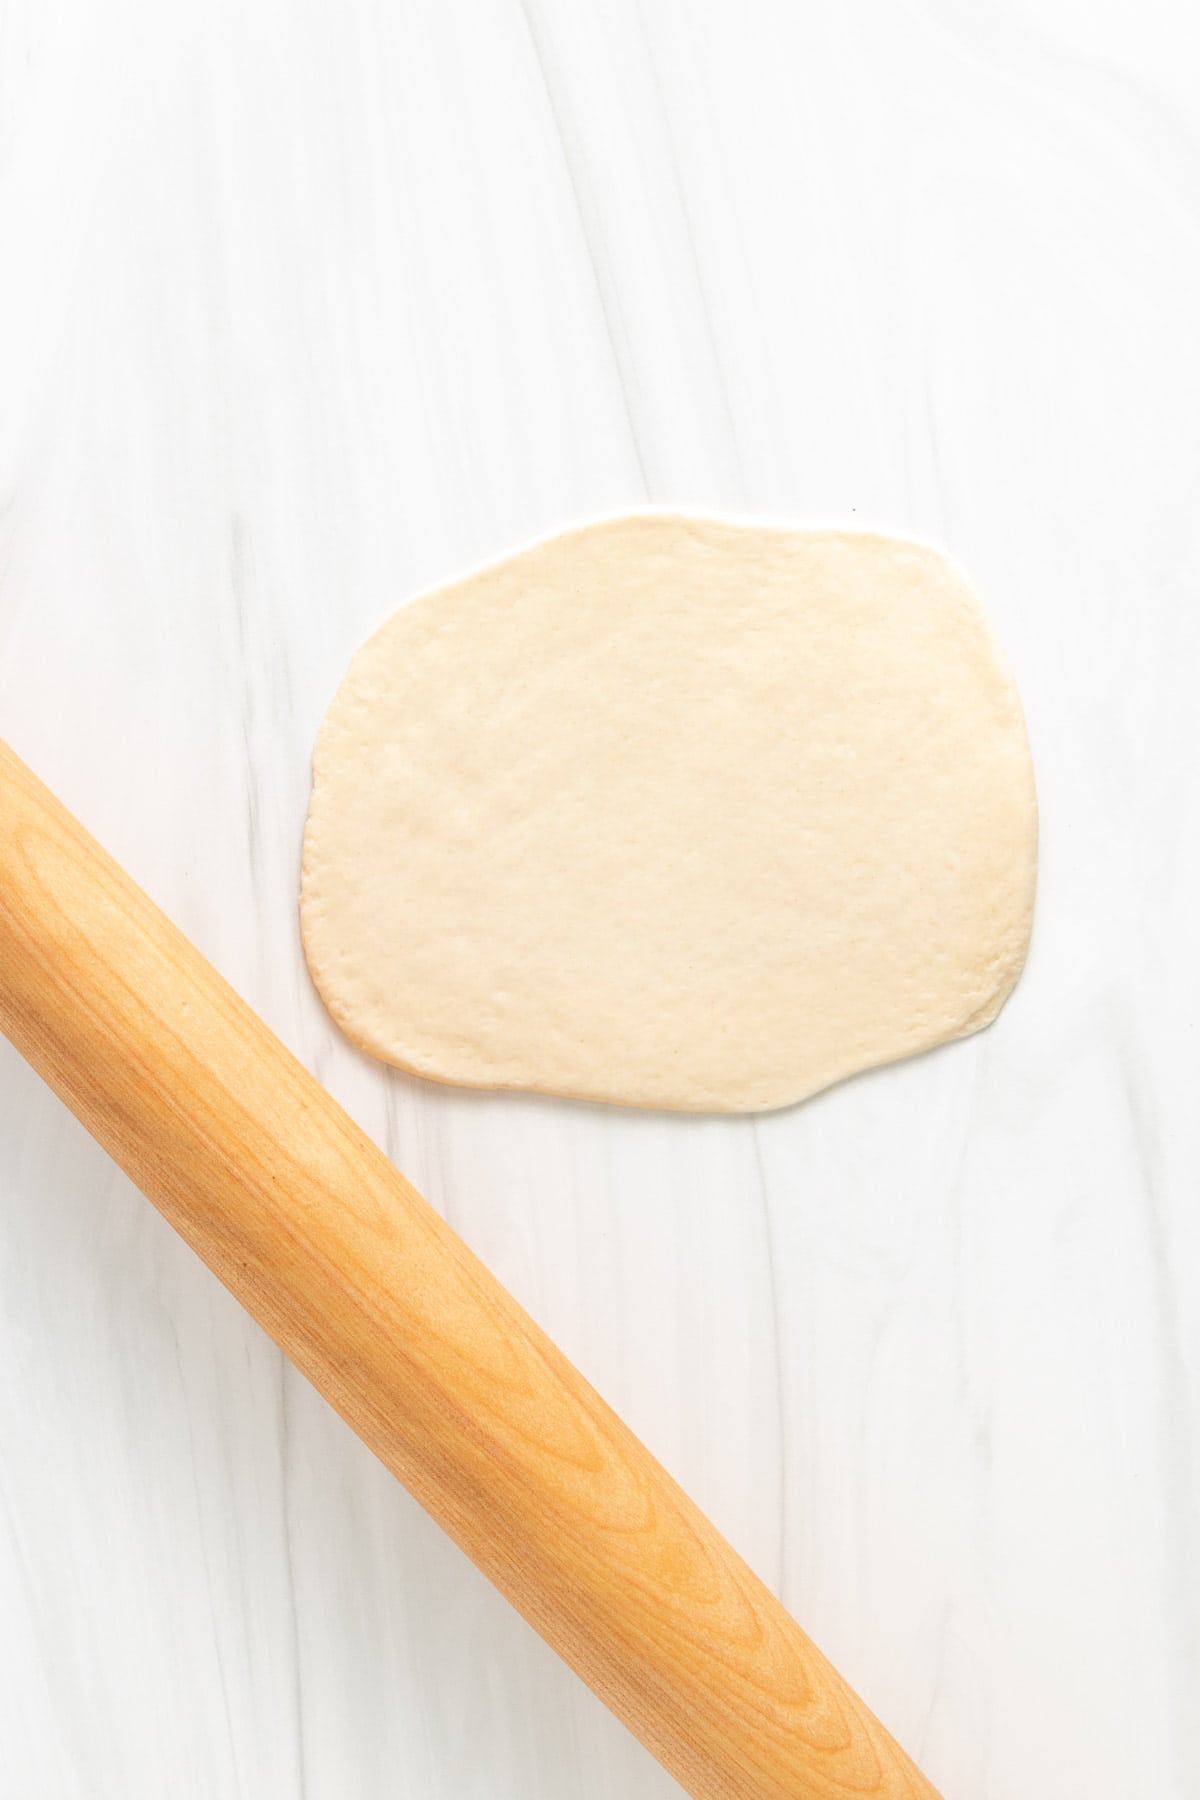 Top down view of naan dough rolled out with a rolling pin.